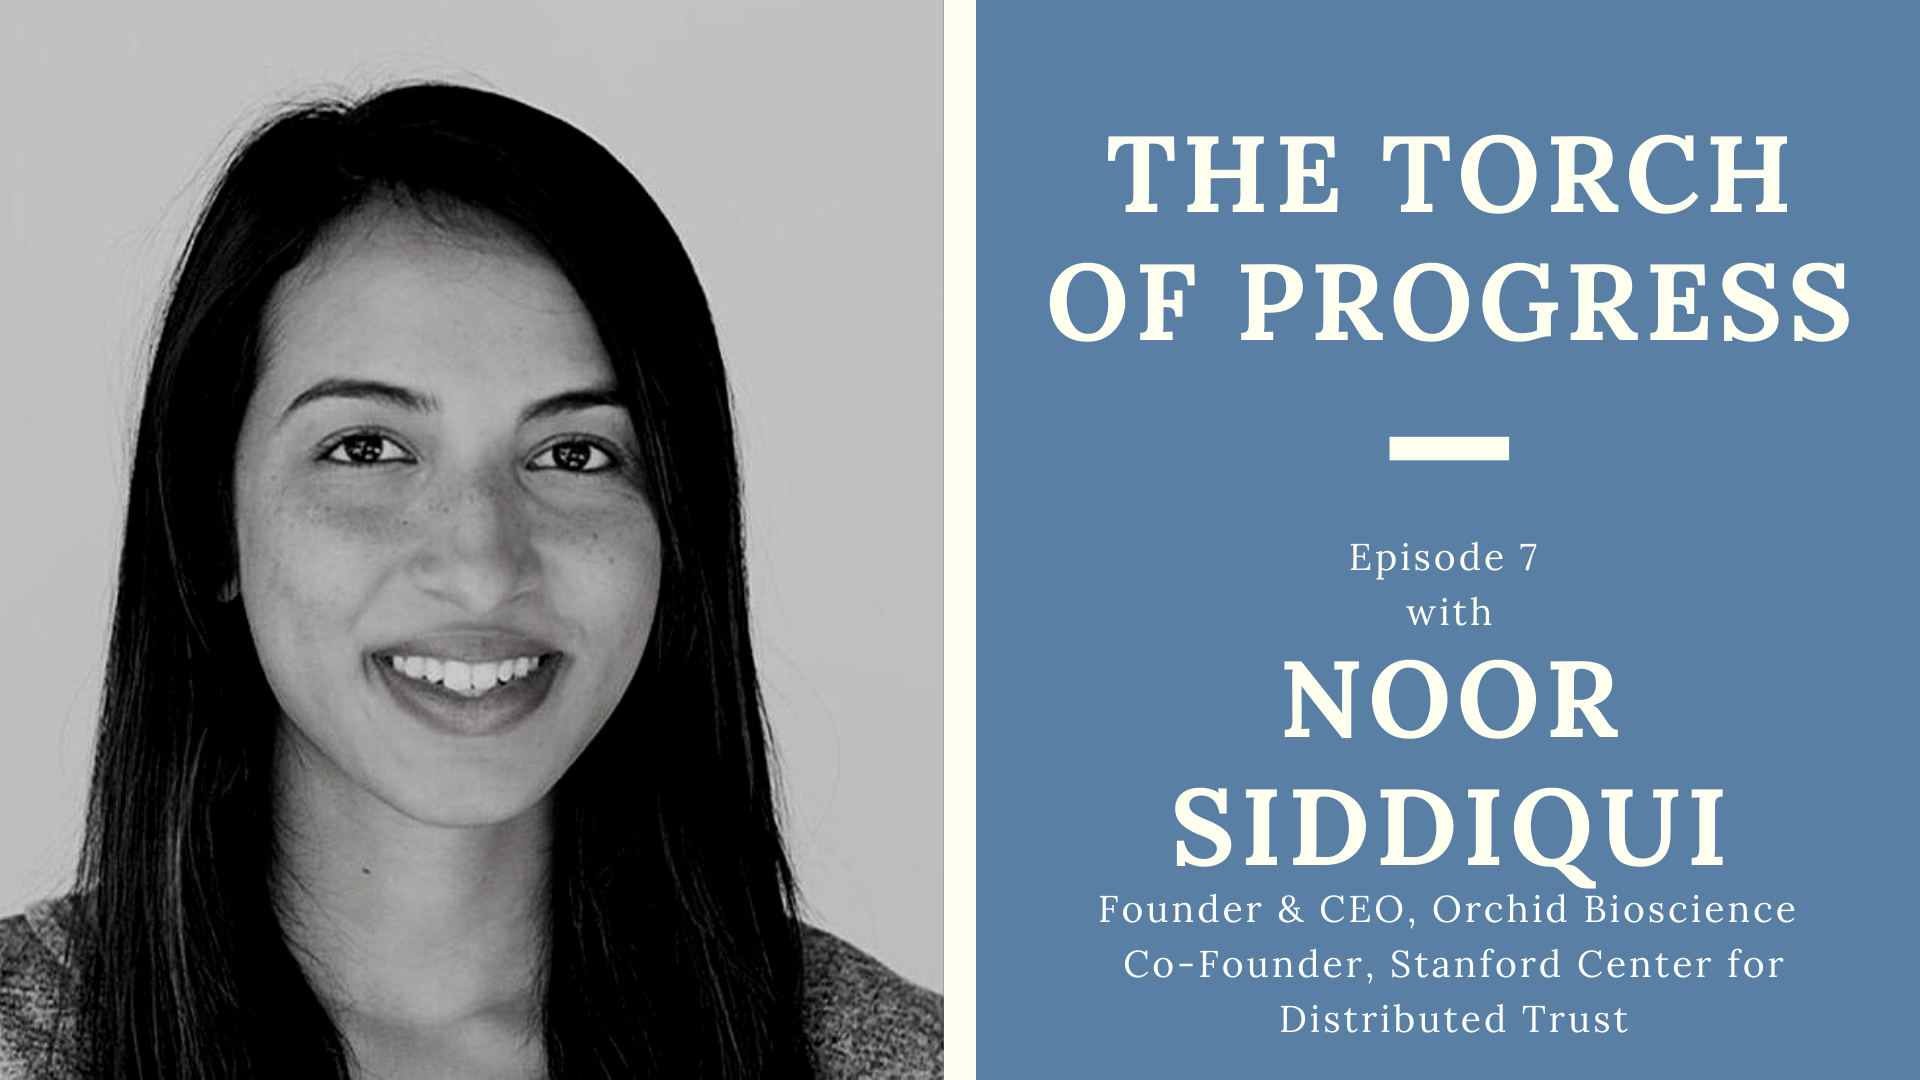 The Torch of Progress, Ep. 7 with Noor Siddiqui